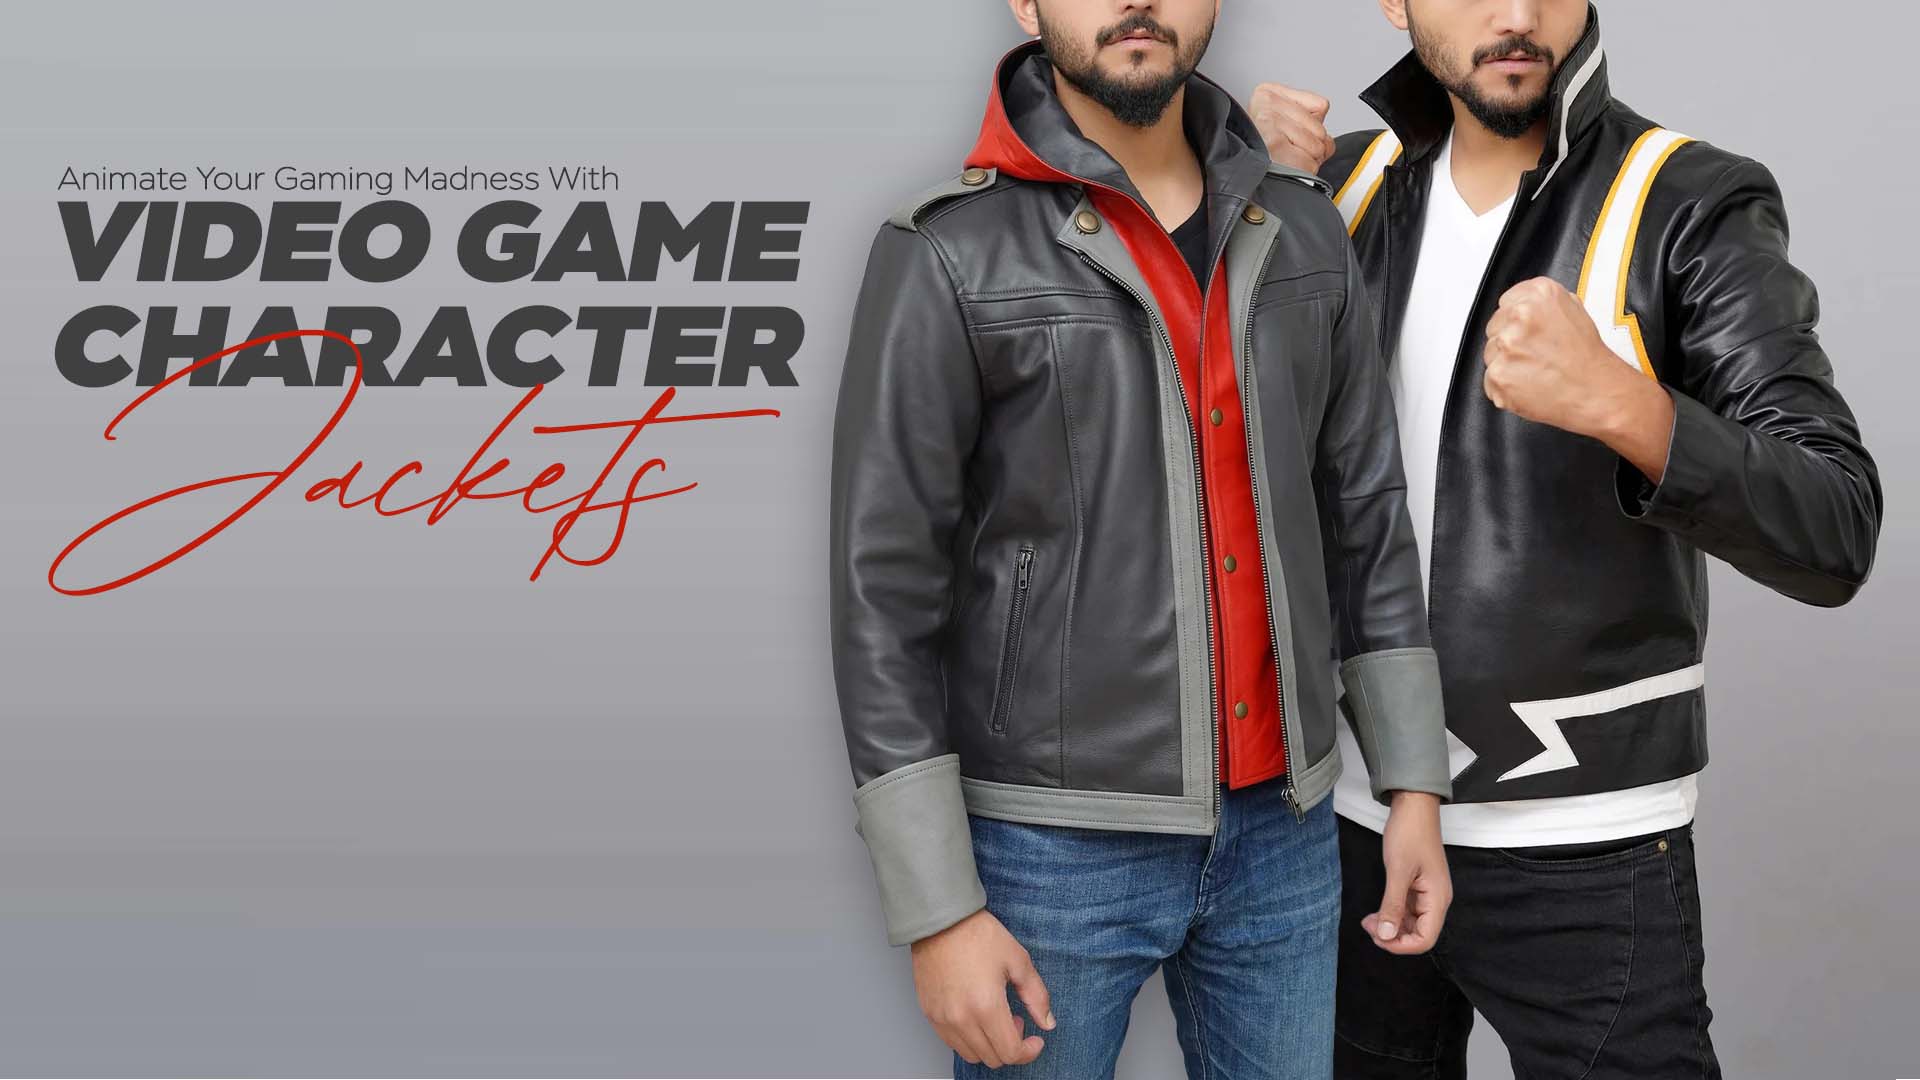 Animate Your Gaming Madness With Video Game Character Jackets